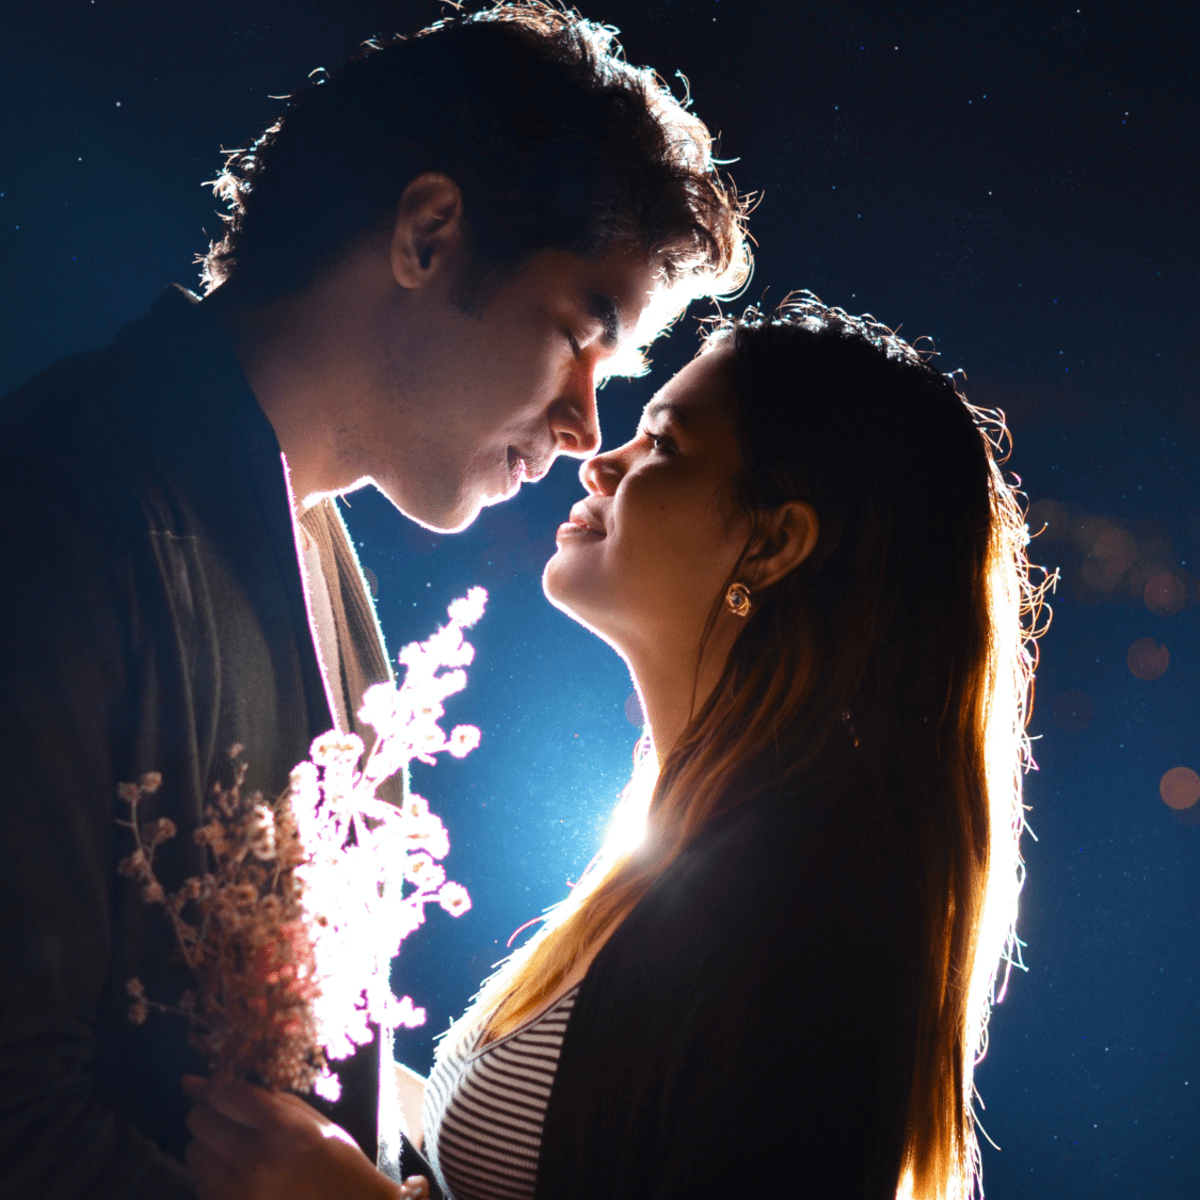 5 Thoughts a girl has after her first kiss - know what really goes on in  her mind